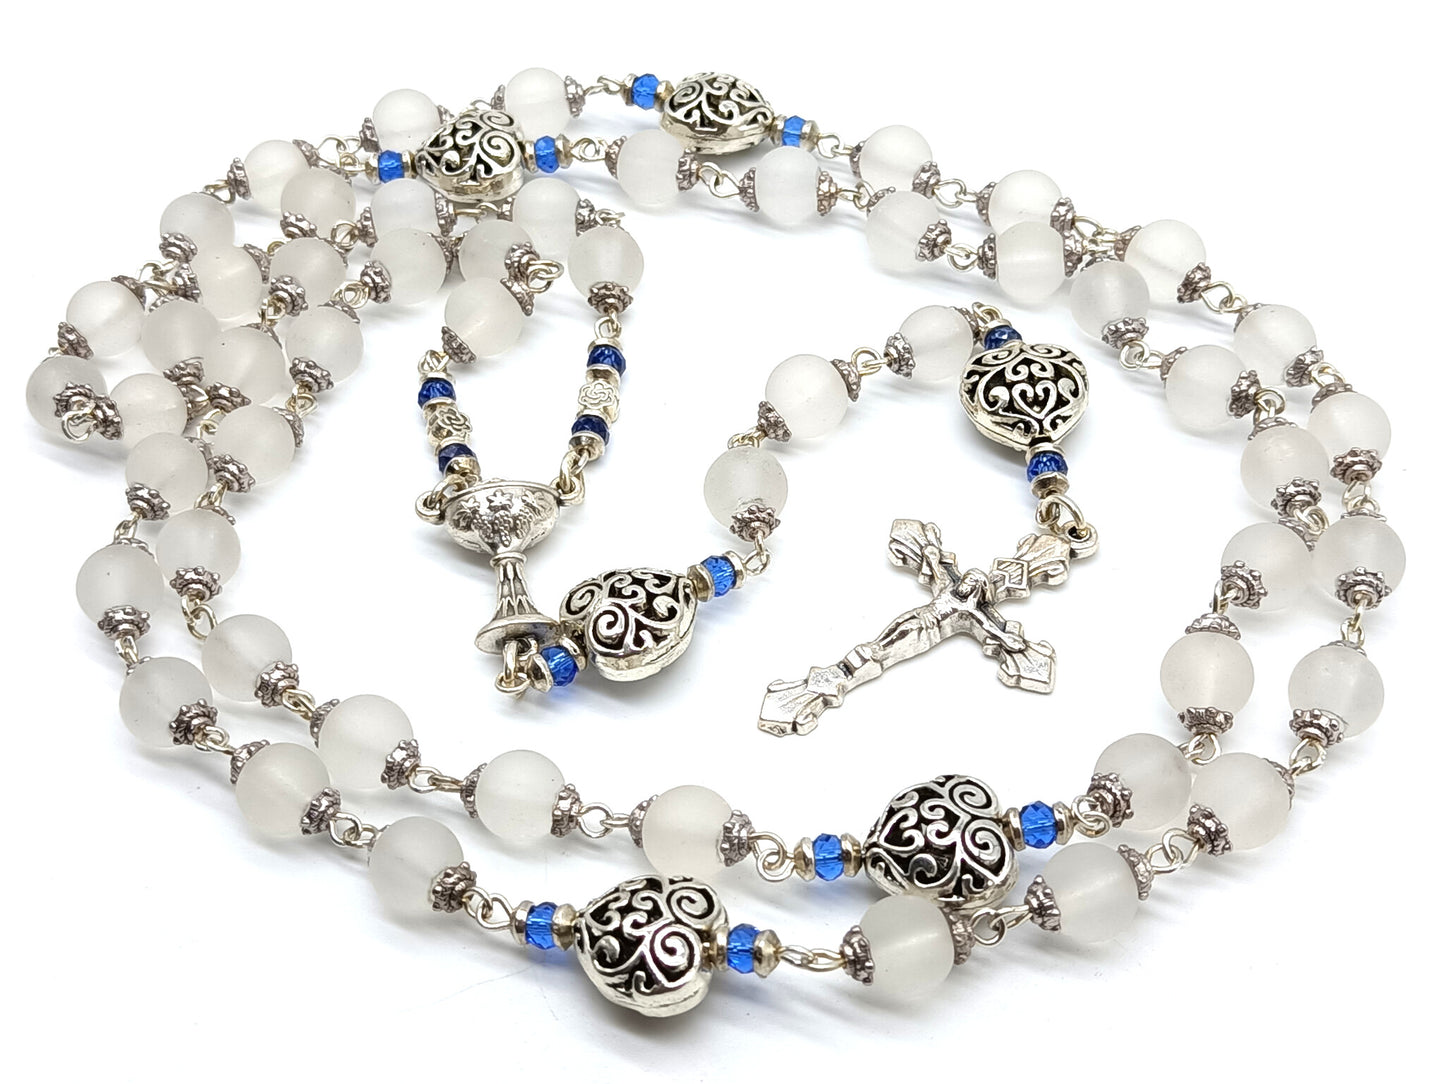 Childs unique rosary beads with white glass beads and silver crucifix and centre medal.